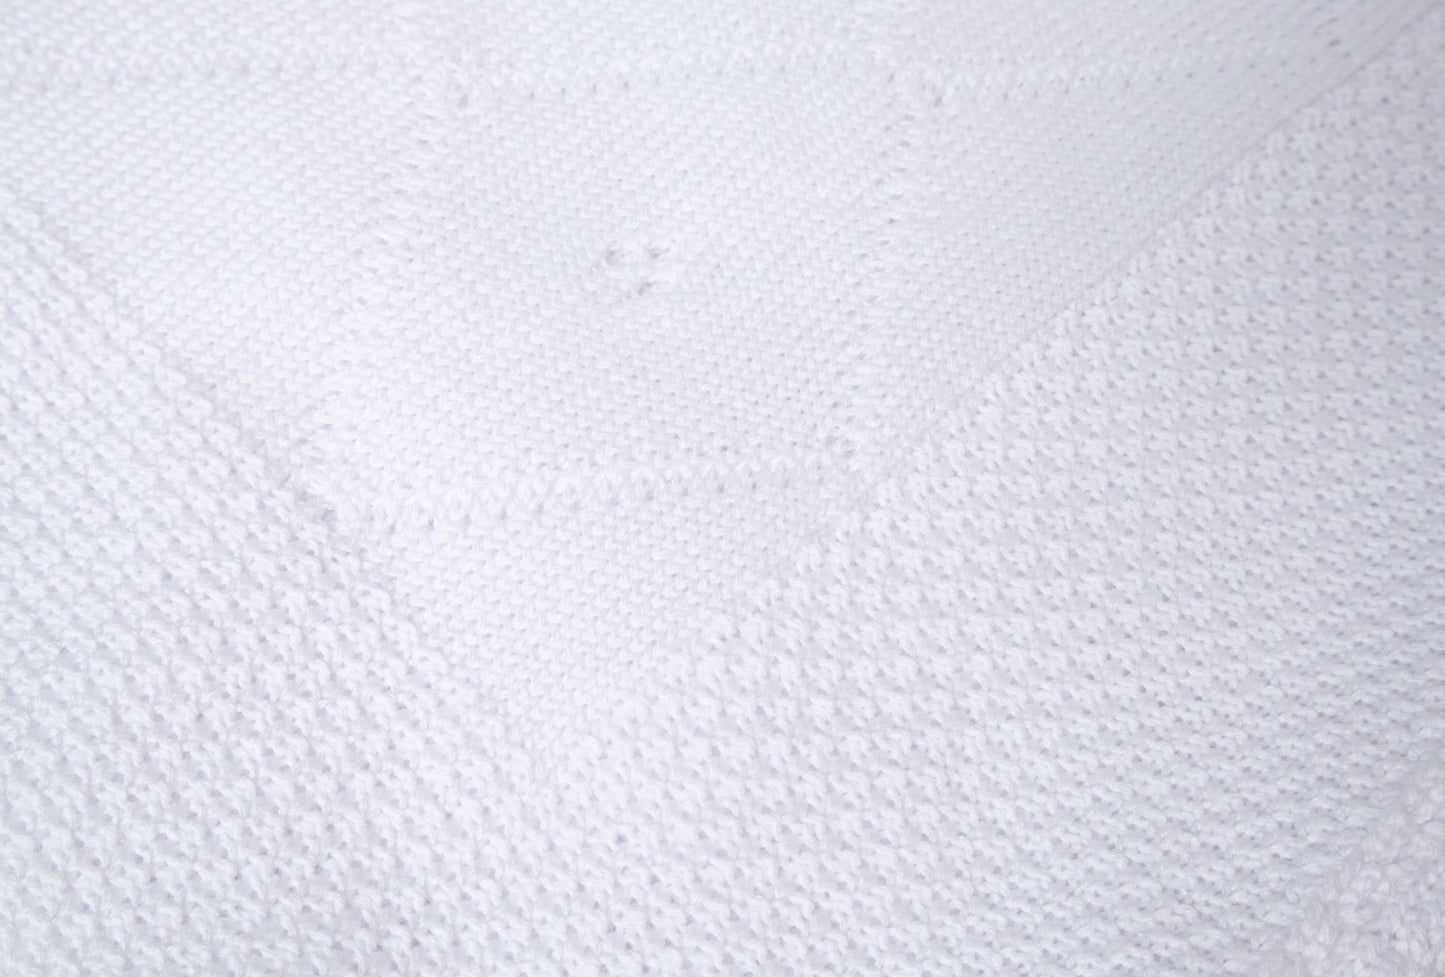 Classic Knit Receiving Blanket, White